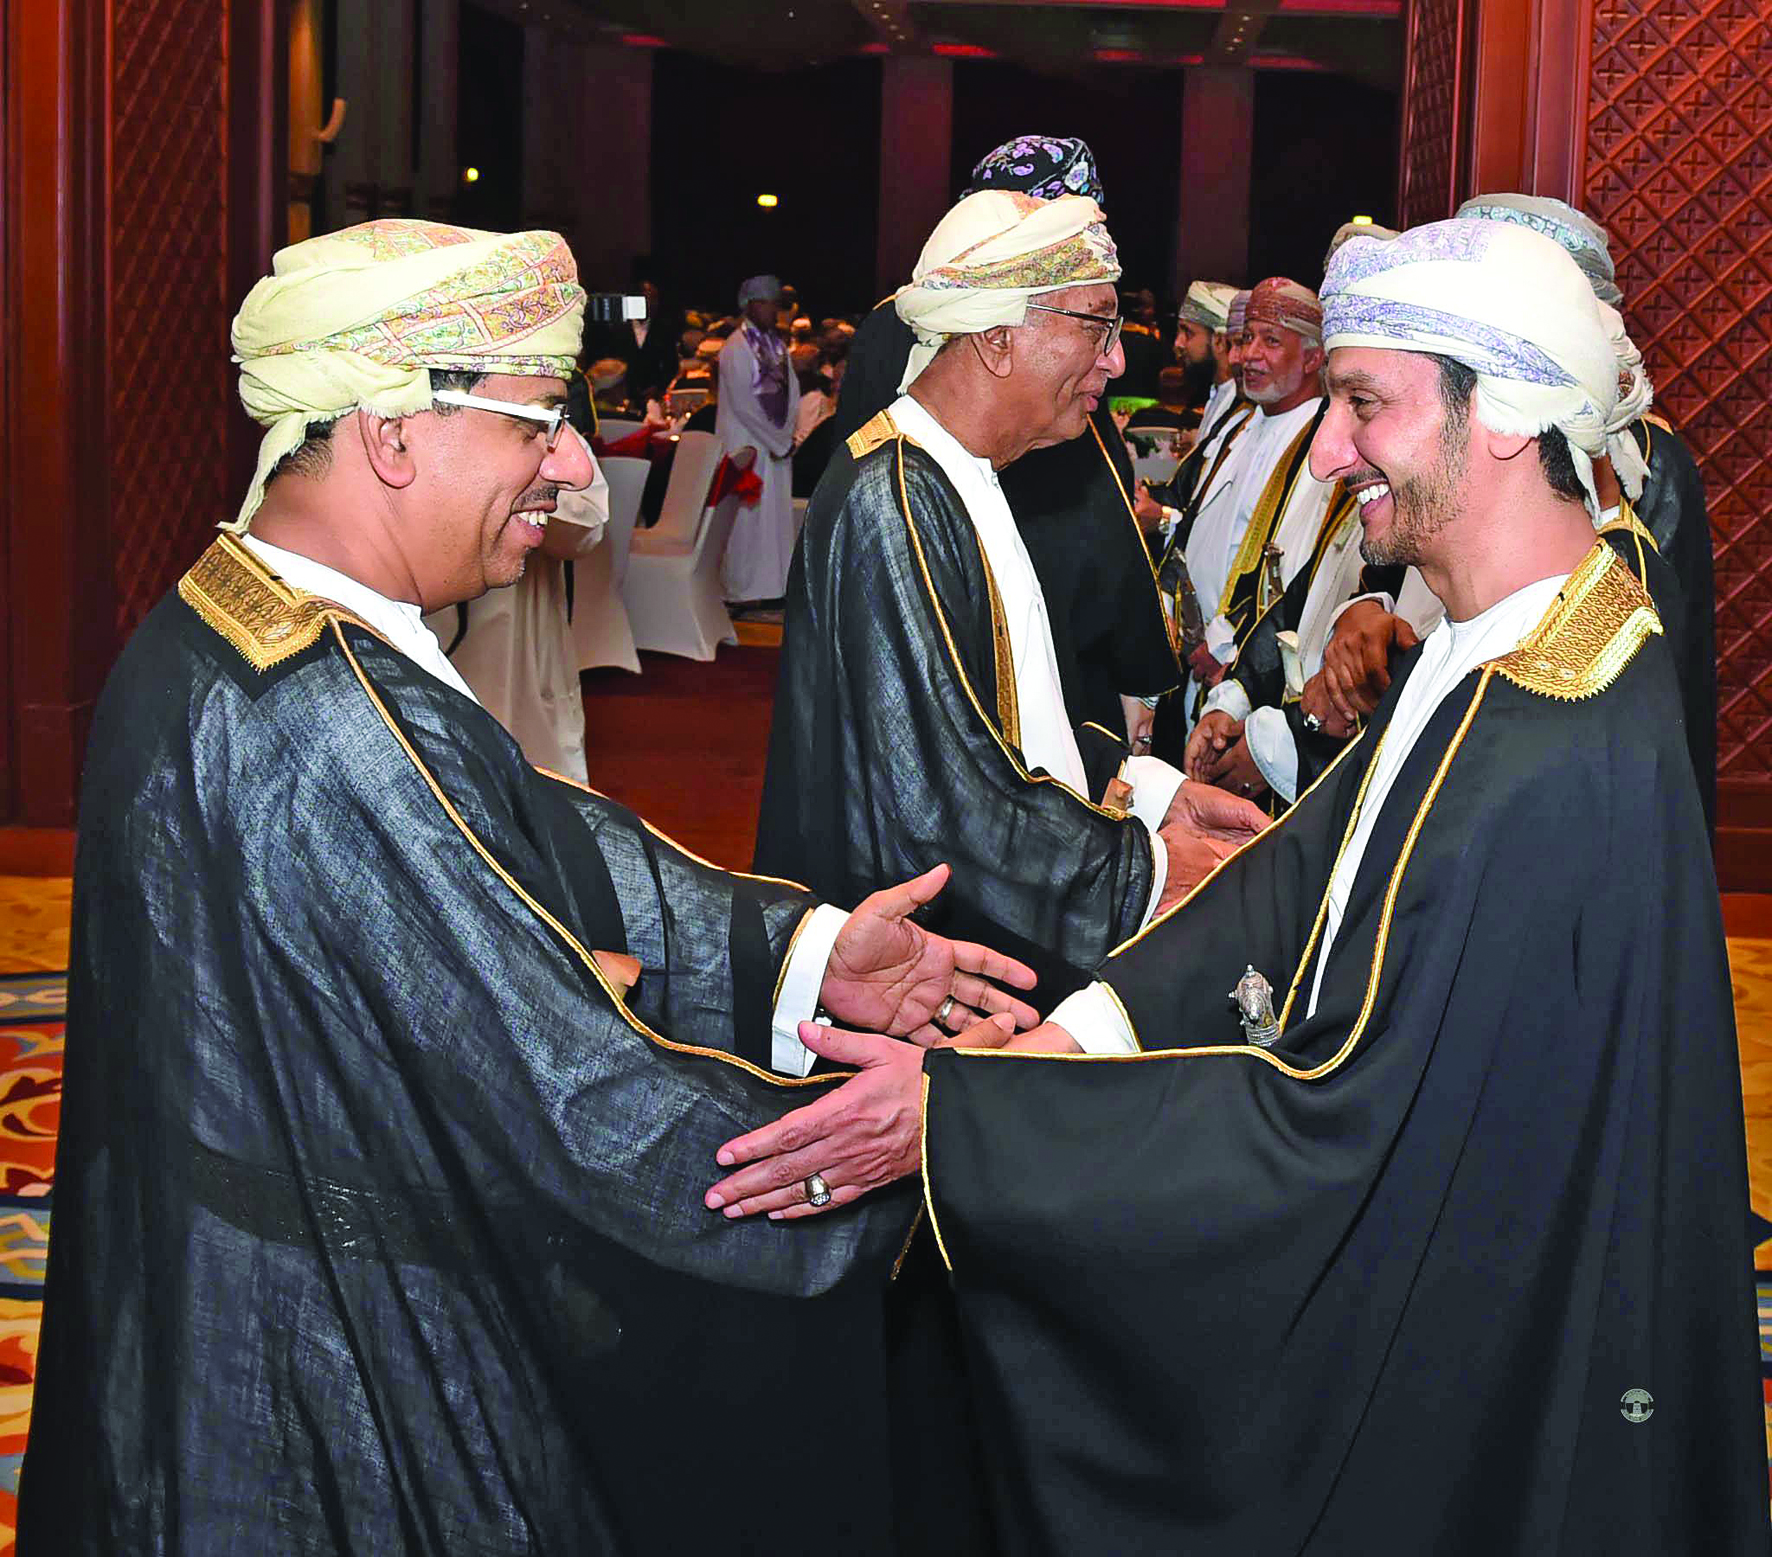 Reception held to mark Oman's National Day